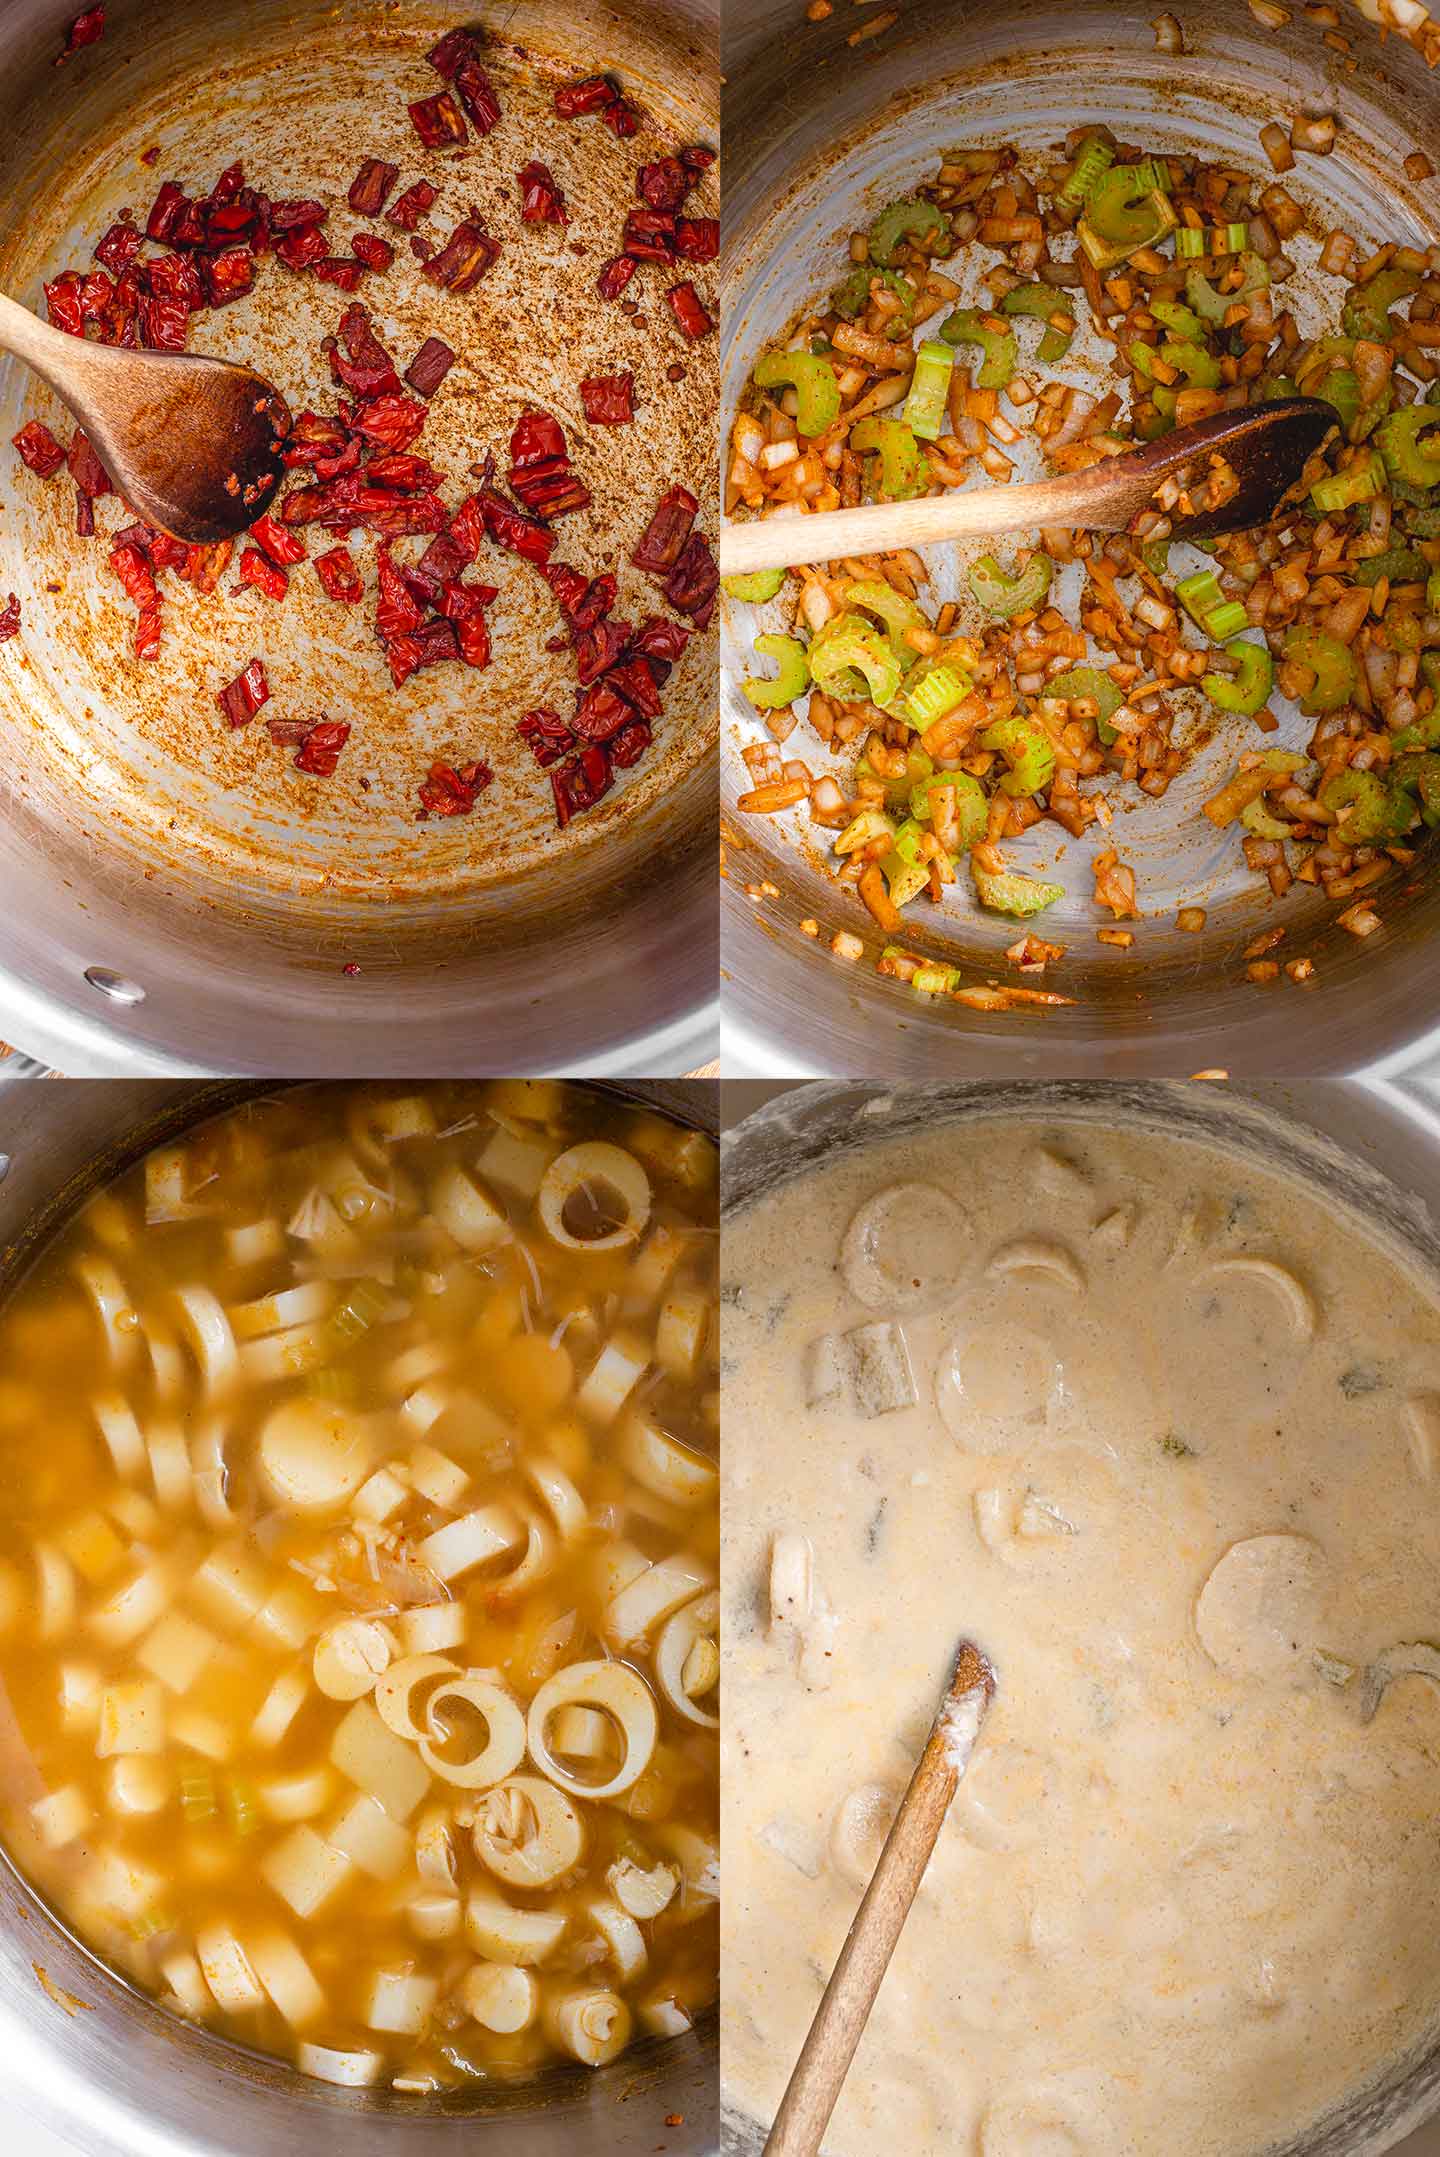 Top down grid of four process photos. Tomato bits are cooked in a large pot. Then onion, garlic, and celery are softened. Broth, potatoes, and hearts of palm are added. Then cashew cream is stirred in.